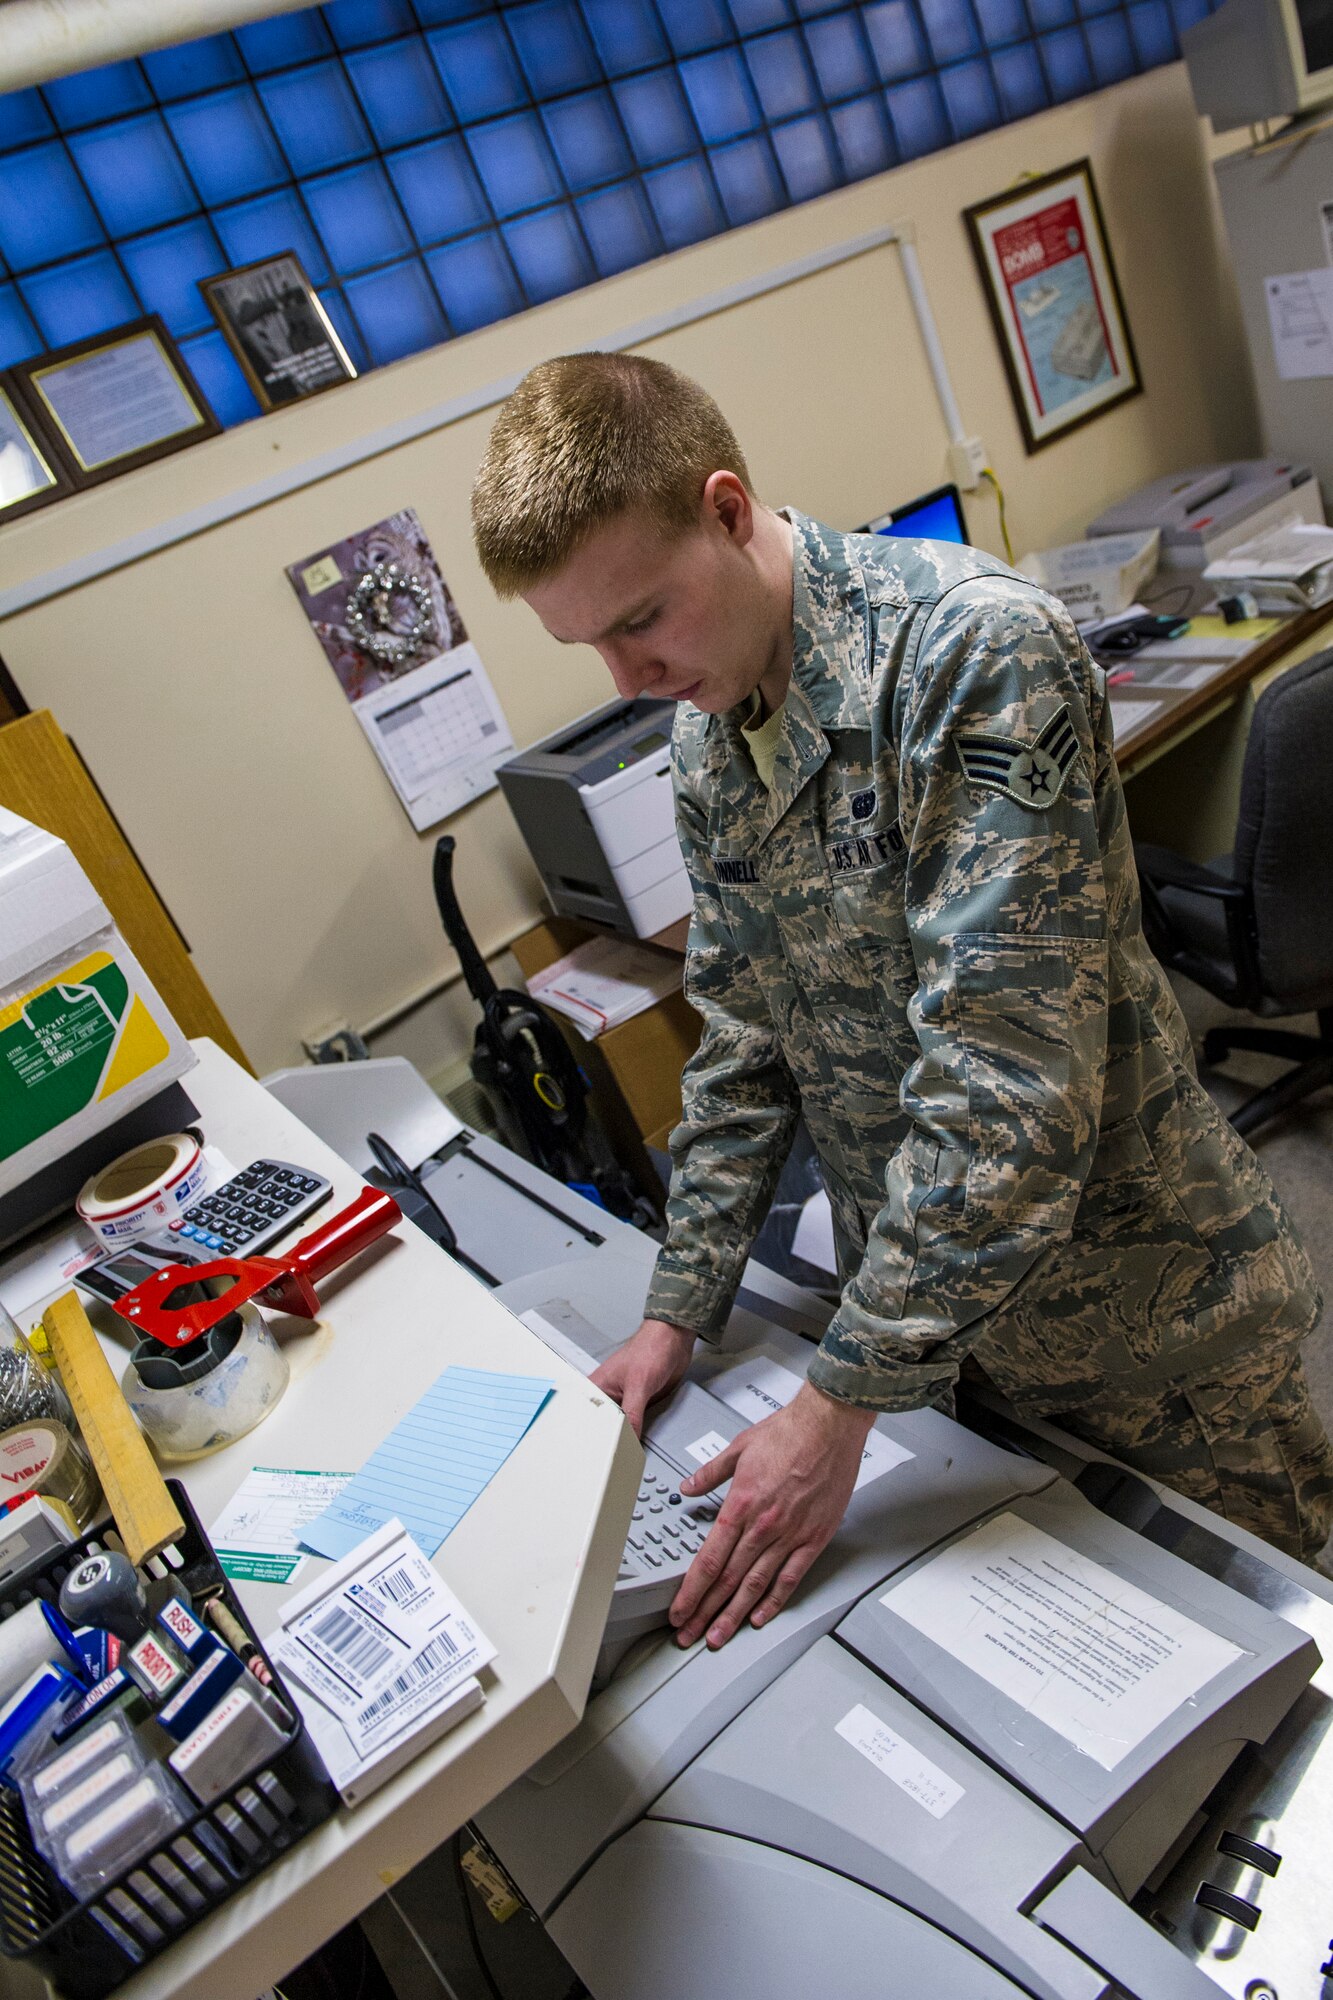 U.S. Air Force Senior Airman Joseph McConnell, 354th Communications Squadron knowledge operations management journeyman, prepares a postage meter Jan. 21, 2014, Eielson Air Force Base, Alaska. The postage meter aids the mail room by weighing packages and placing postage on mail. (U.S. Air Force photo by Senior Airman Joshua Turner/Released)